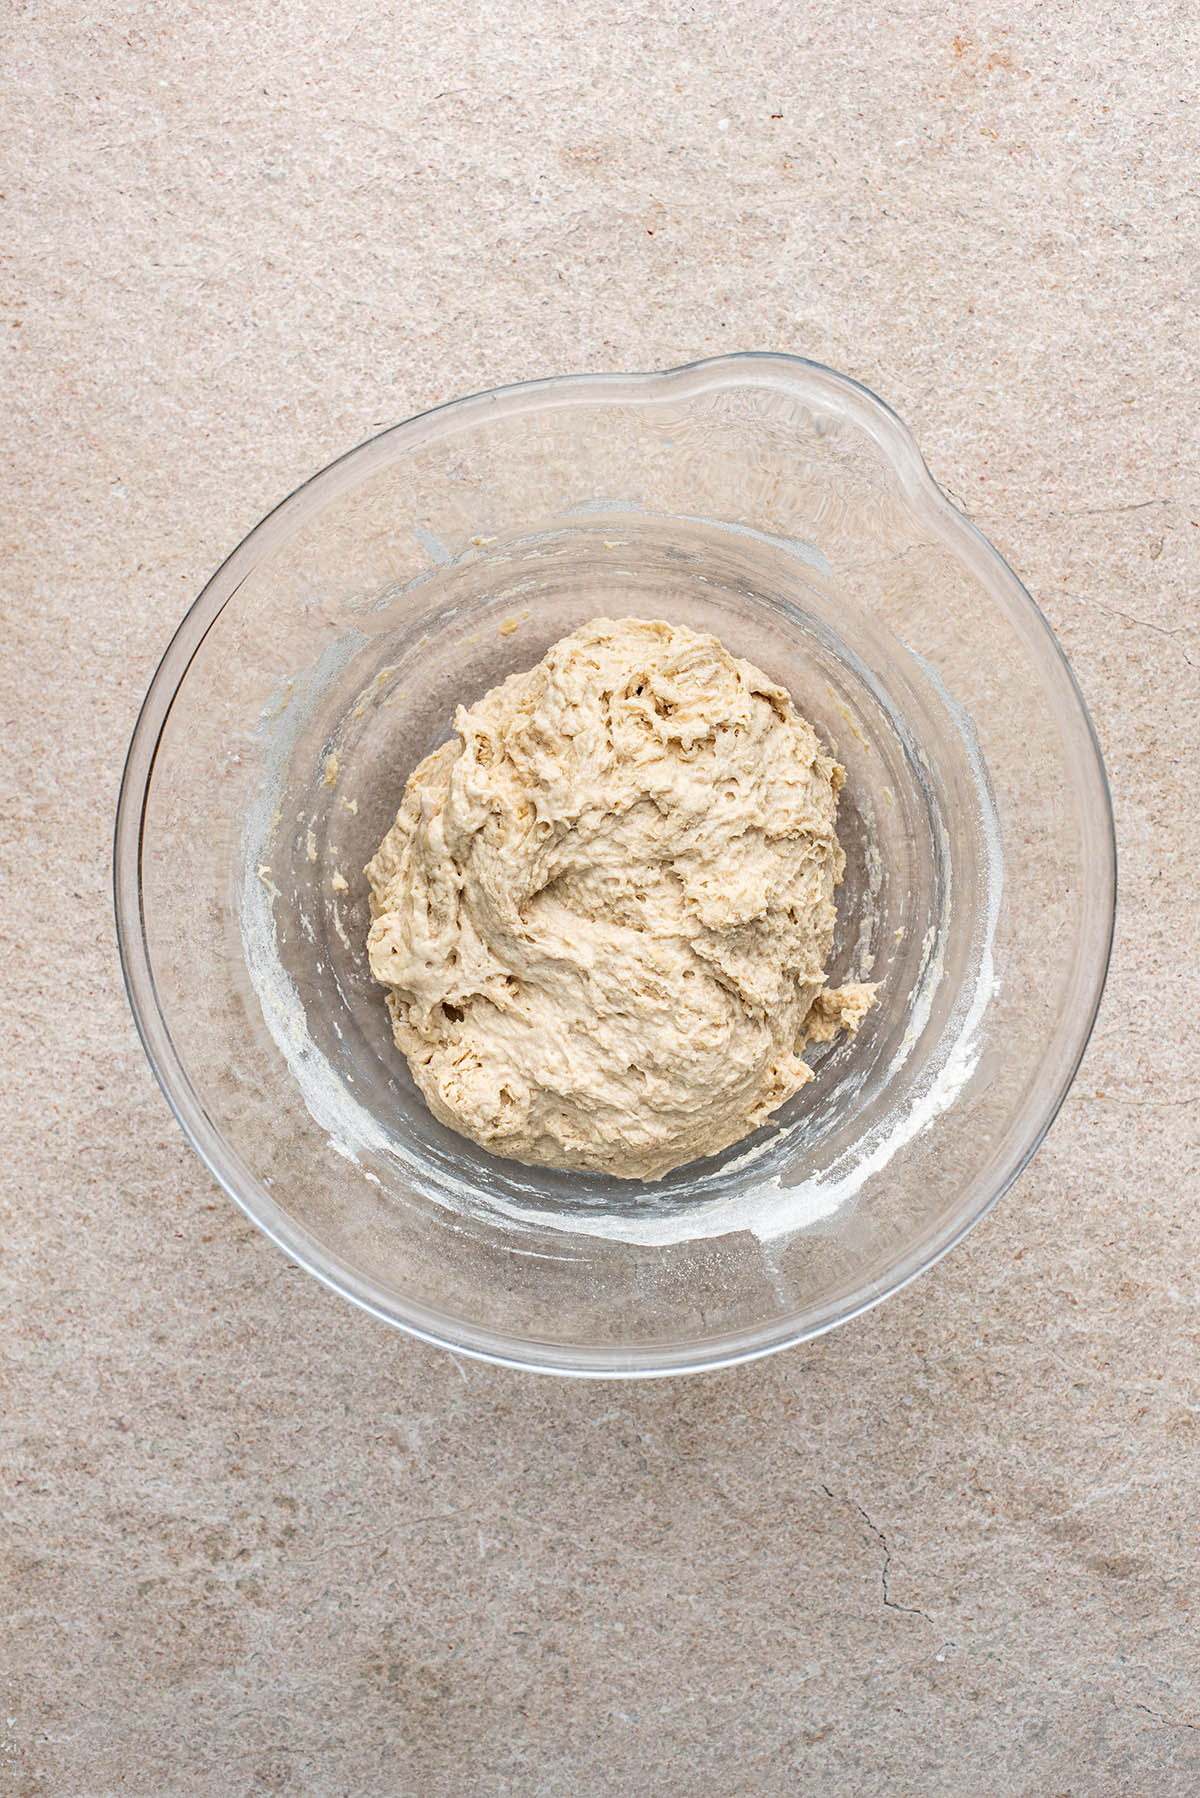 English muffin dough after mixing.